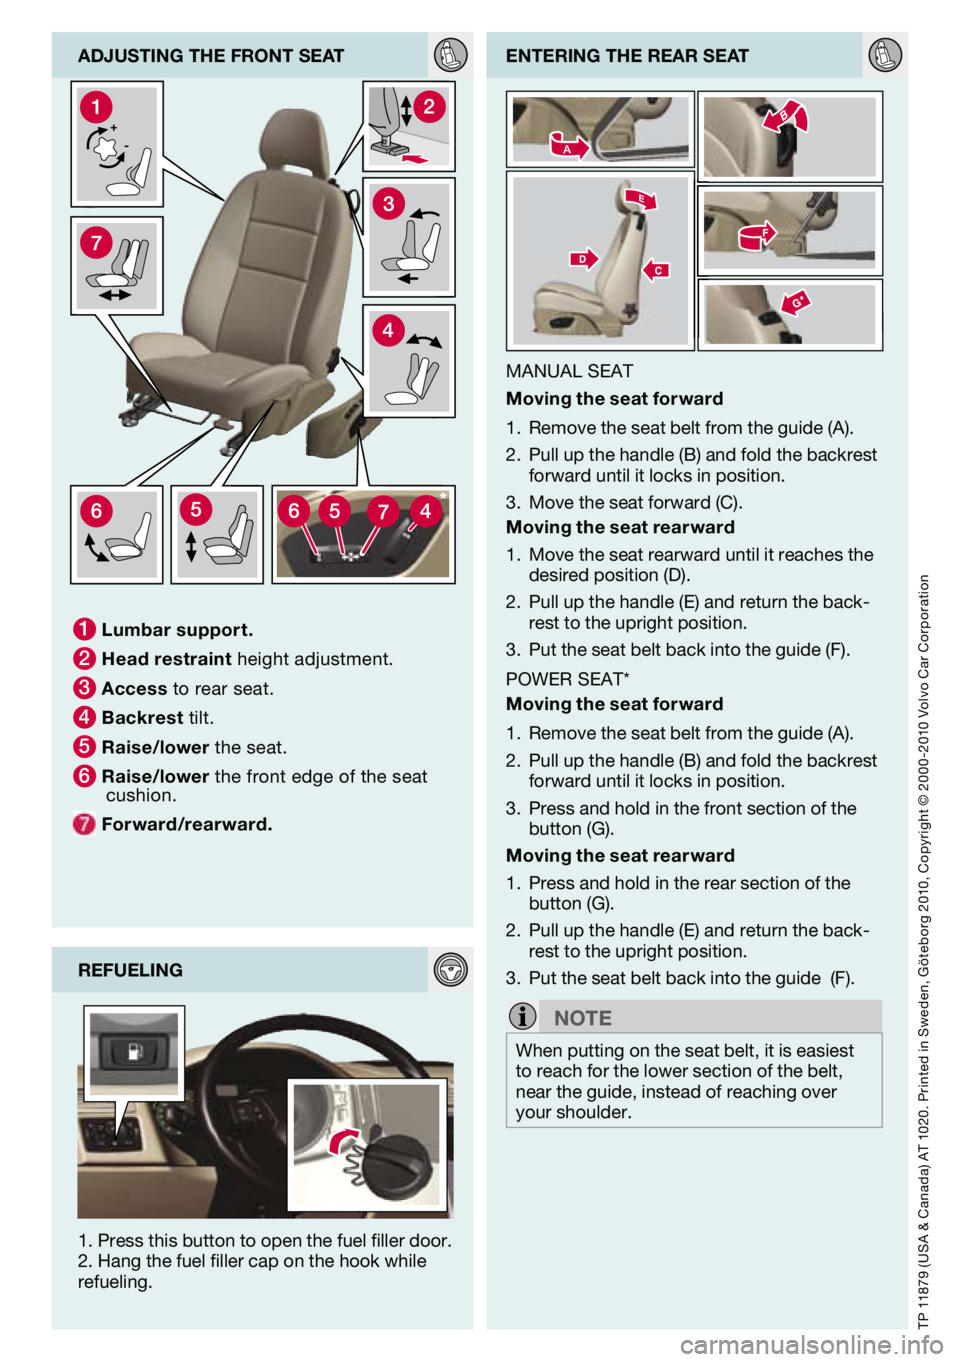 VOLVO C30 2011  Quick Guide 
TP 11879 (Usa & Canada)  aT 1020. Printed in  sweden,  göteborg 2010, Copyright © 2000 -2010  volvo Car Corporation
enterIng the rear seat
MaNUal seaT
m oving the seat forward
remove the seat belt 